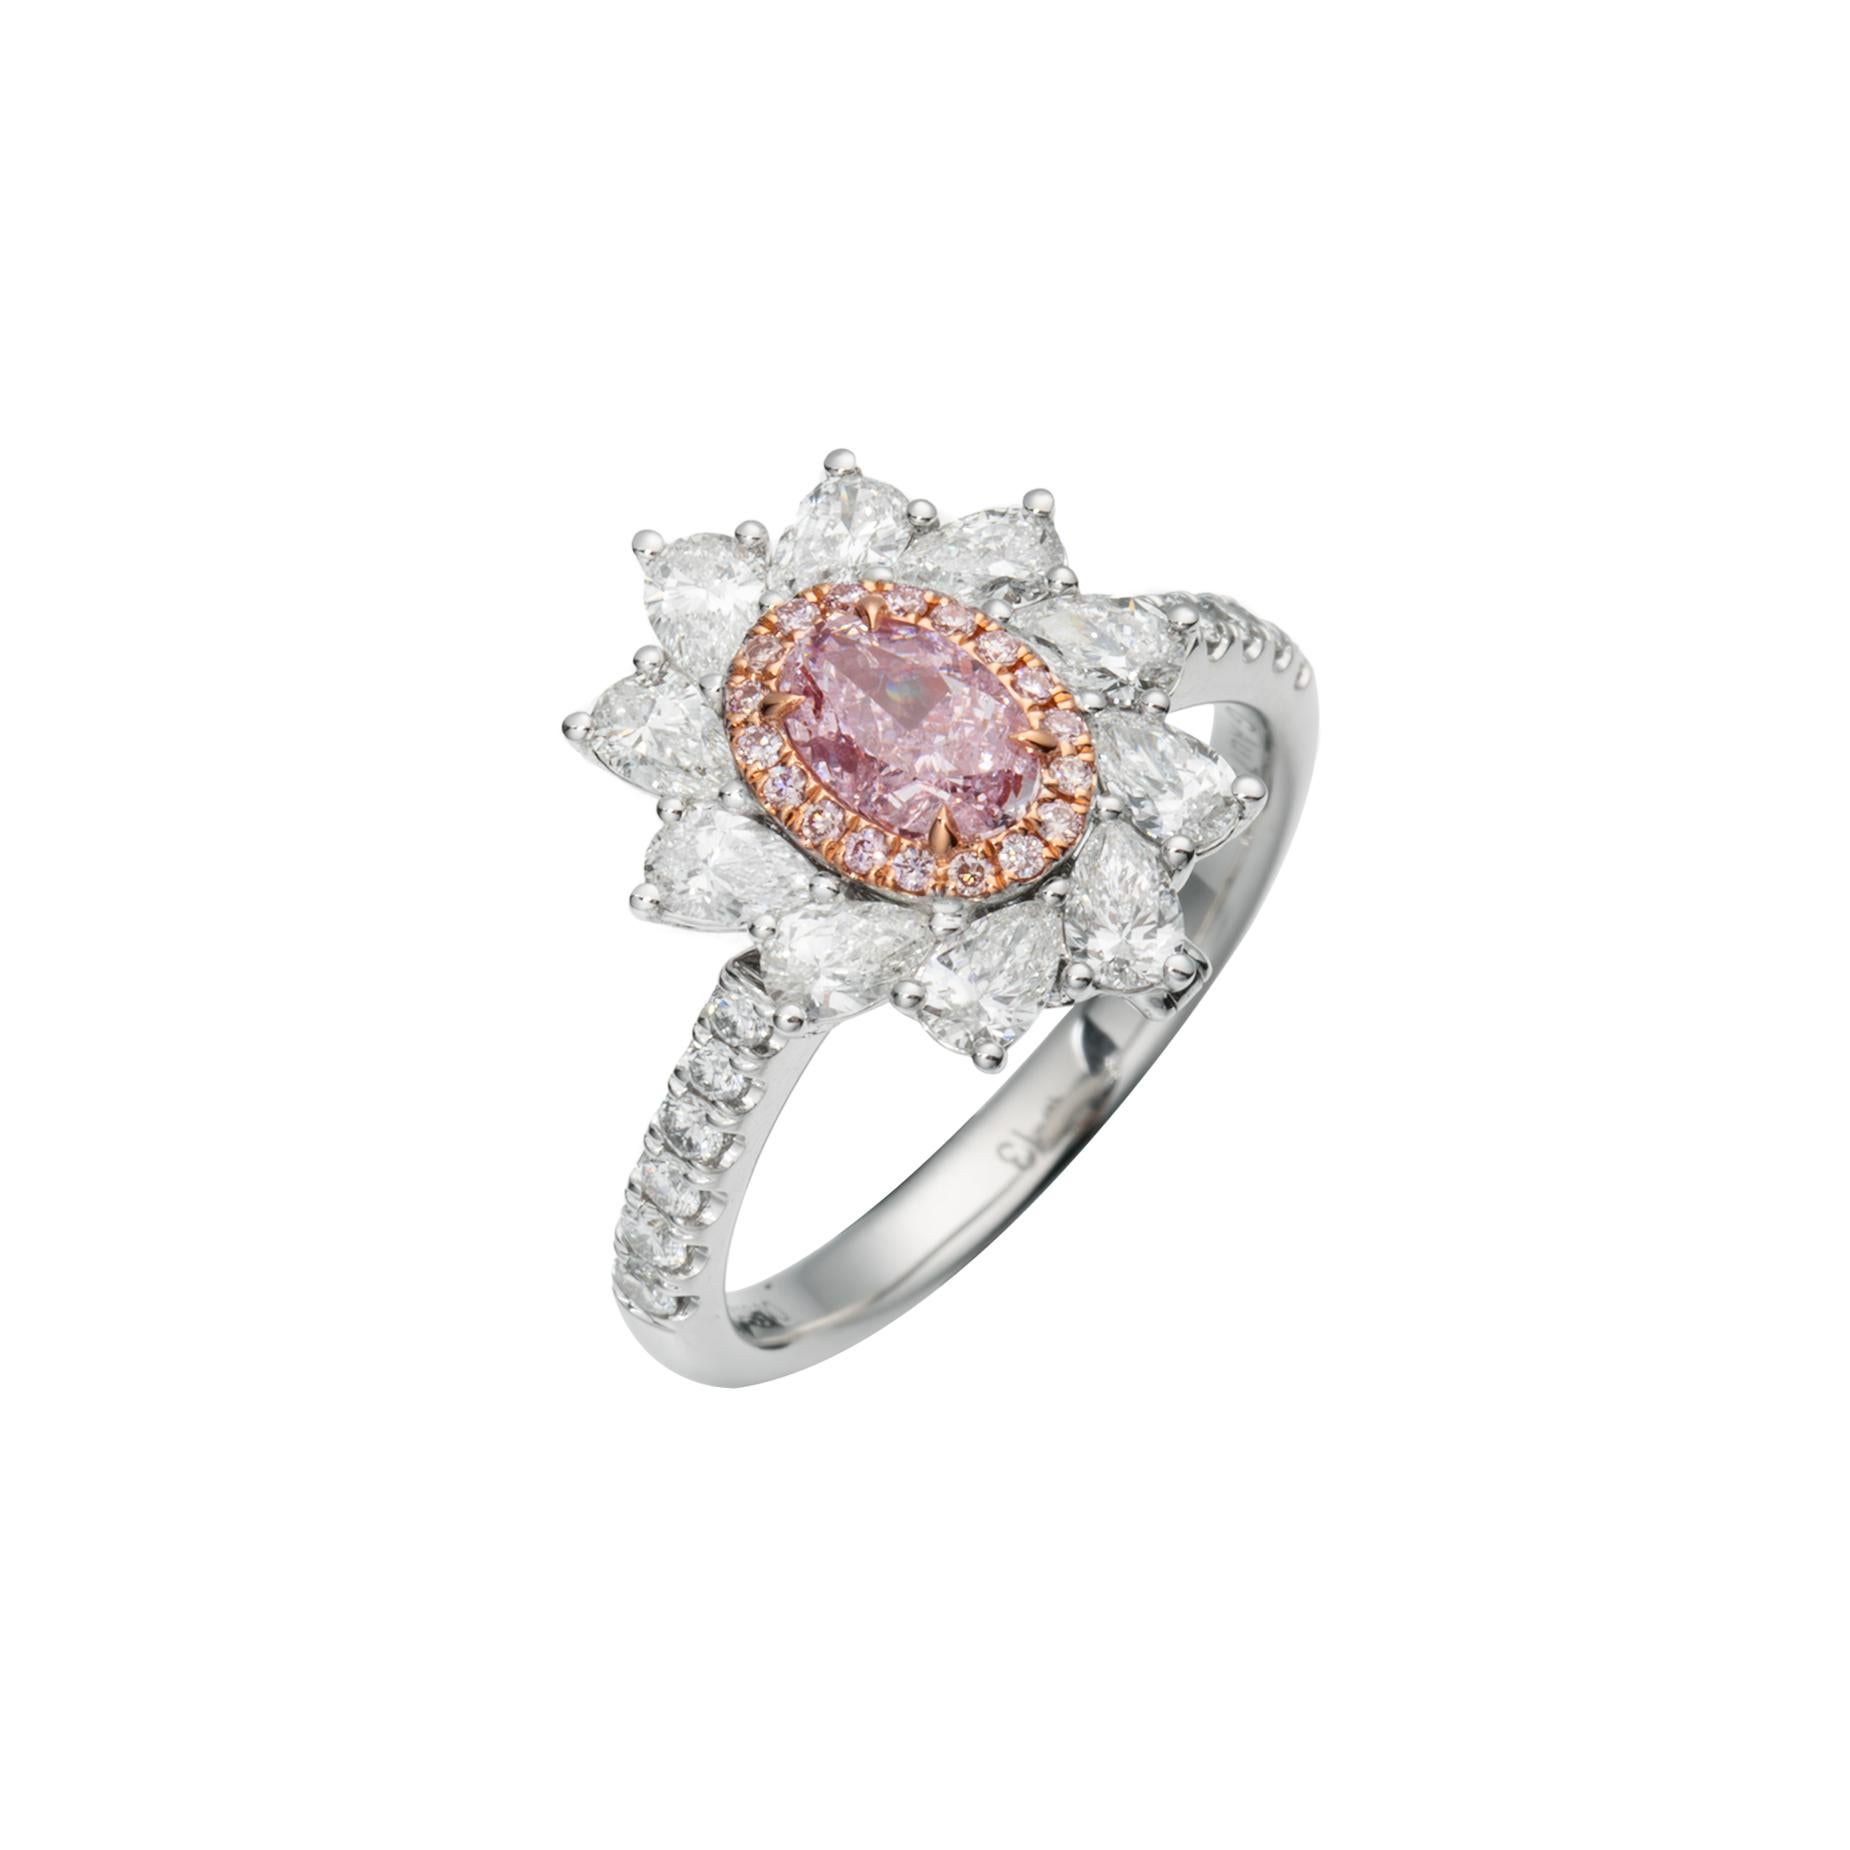 Prepare to be entranced by a symphony of colors and brilliance – the GIA Certified 0.50 carat Natural Fancy Light Purplish Pink Oval Shape Diamond Ring. Set upon a radiant 18kt gold band, this exquisite piece is a true marvel that captures the